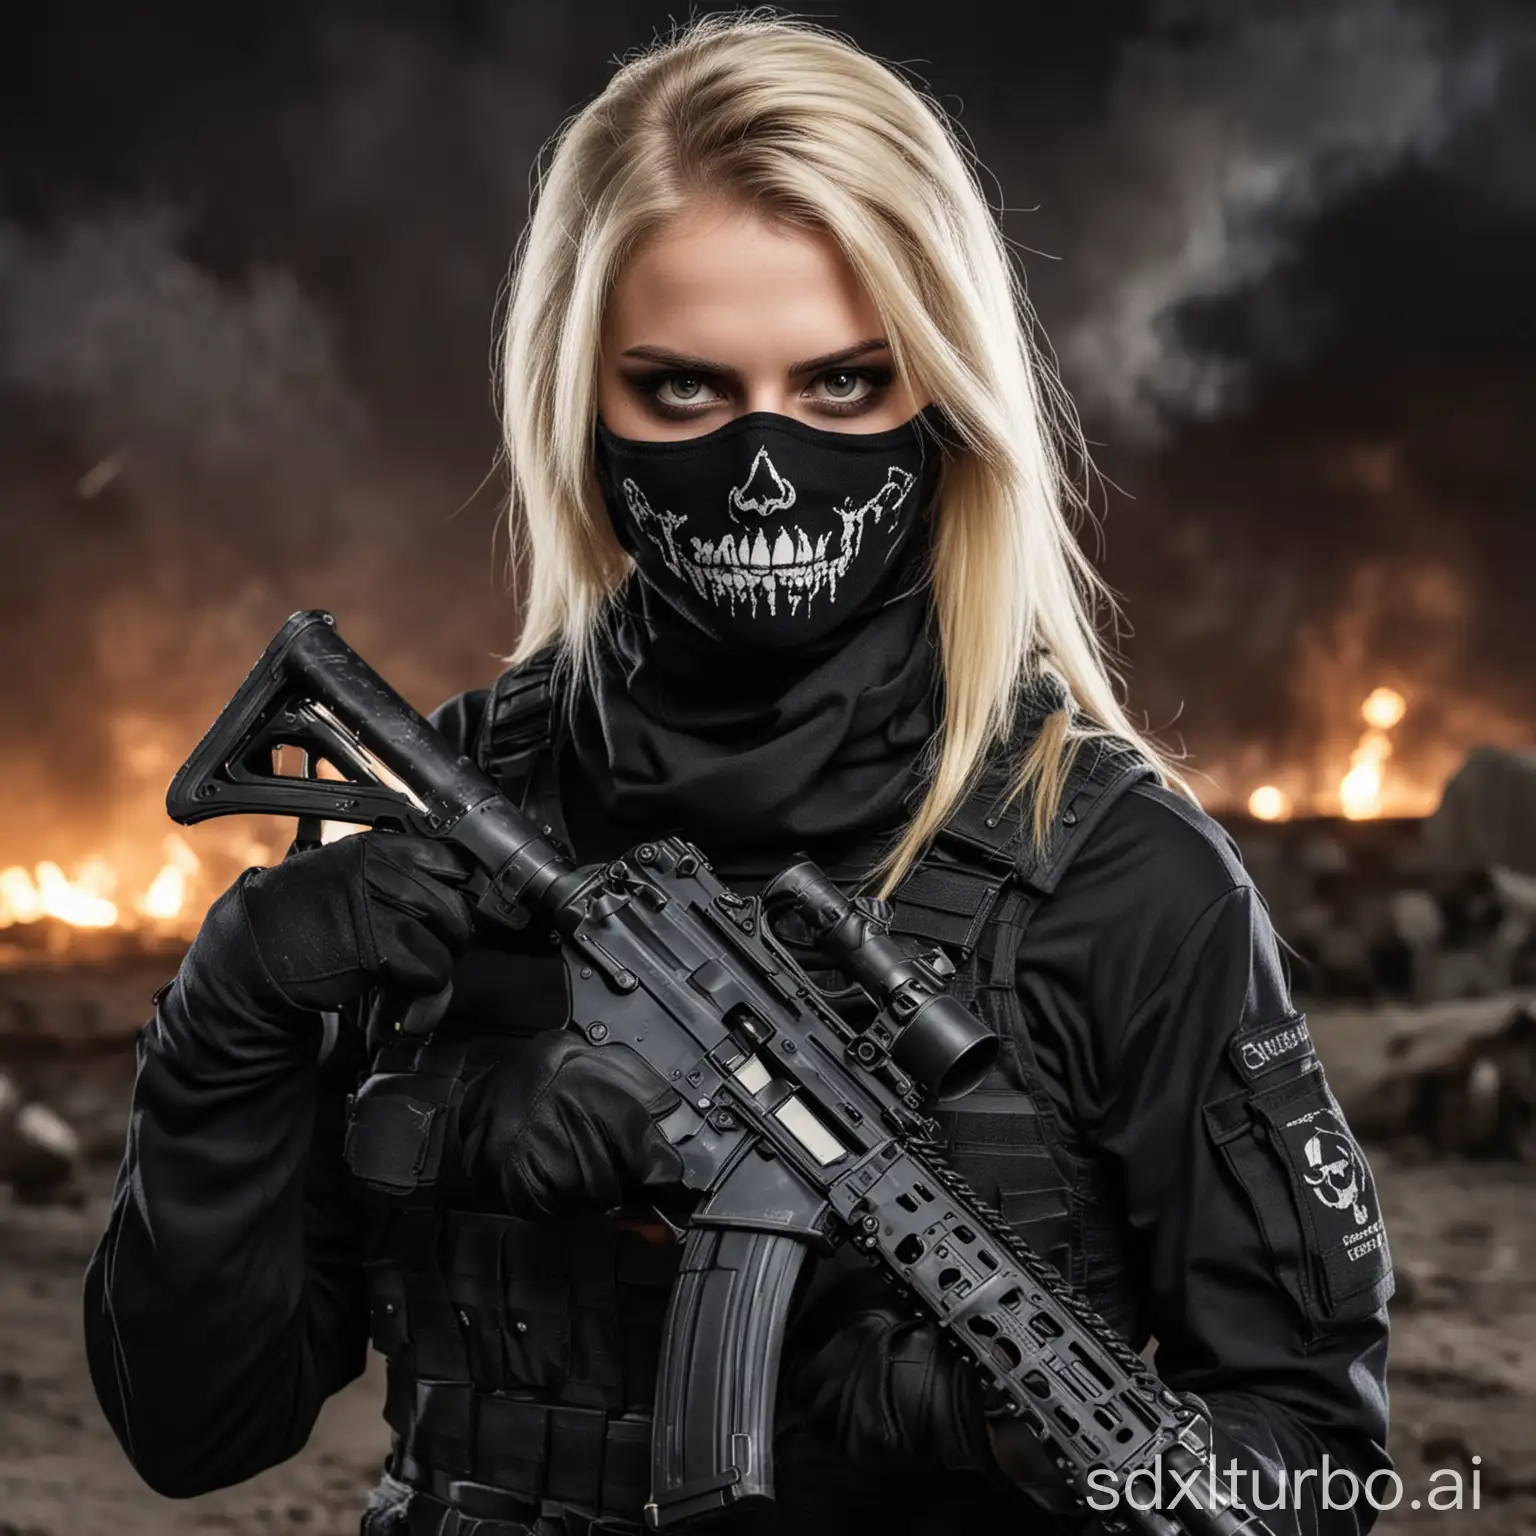 Blonde-Female-Soldier-in-Tactical-Gear-Amidst-Nighttime-Explosions